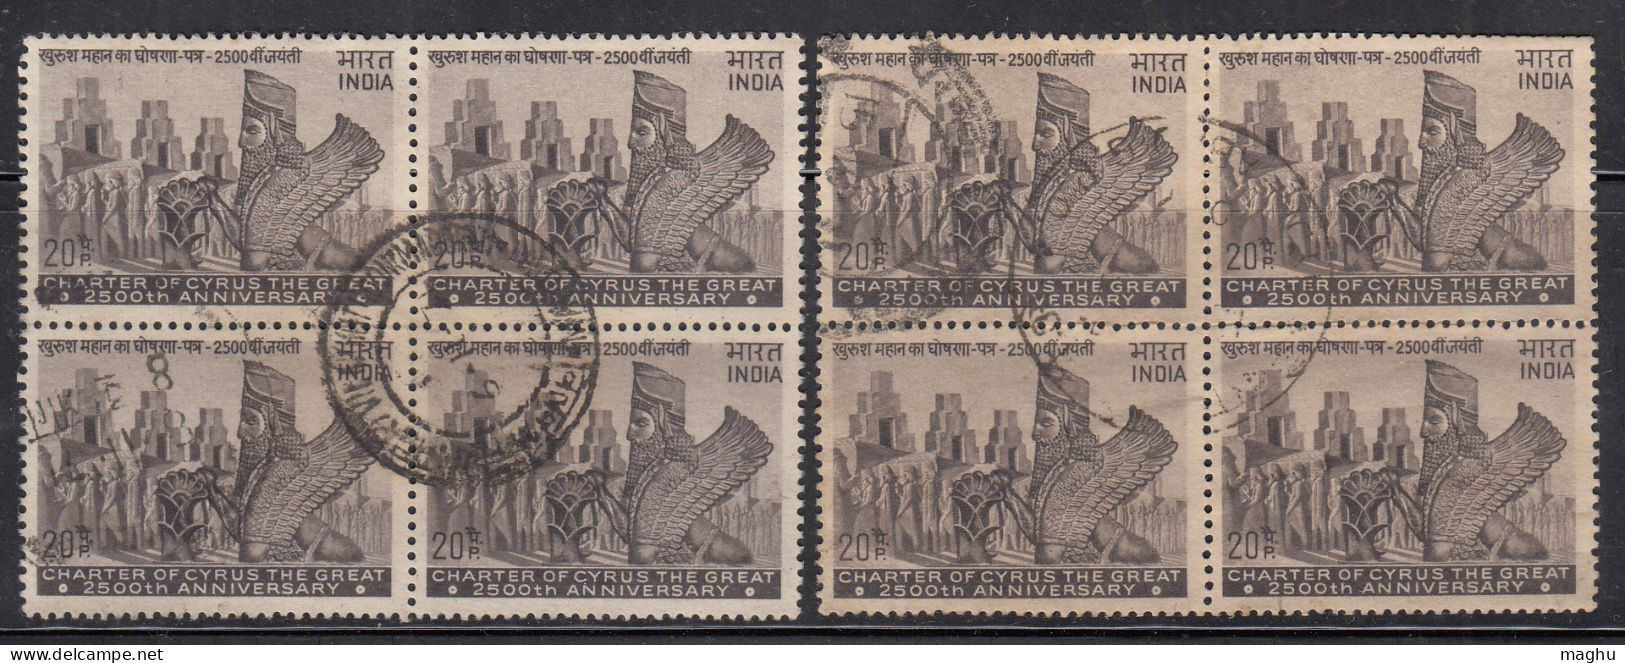 Block Of 4 X 2 , 2500TH ANNIV OF CHARTER OF CYRUS THE GREAT FOUNDER, PERSIAN EMPIRE Ruler, India 1971 - Blocks & Kleinbögen